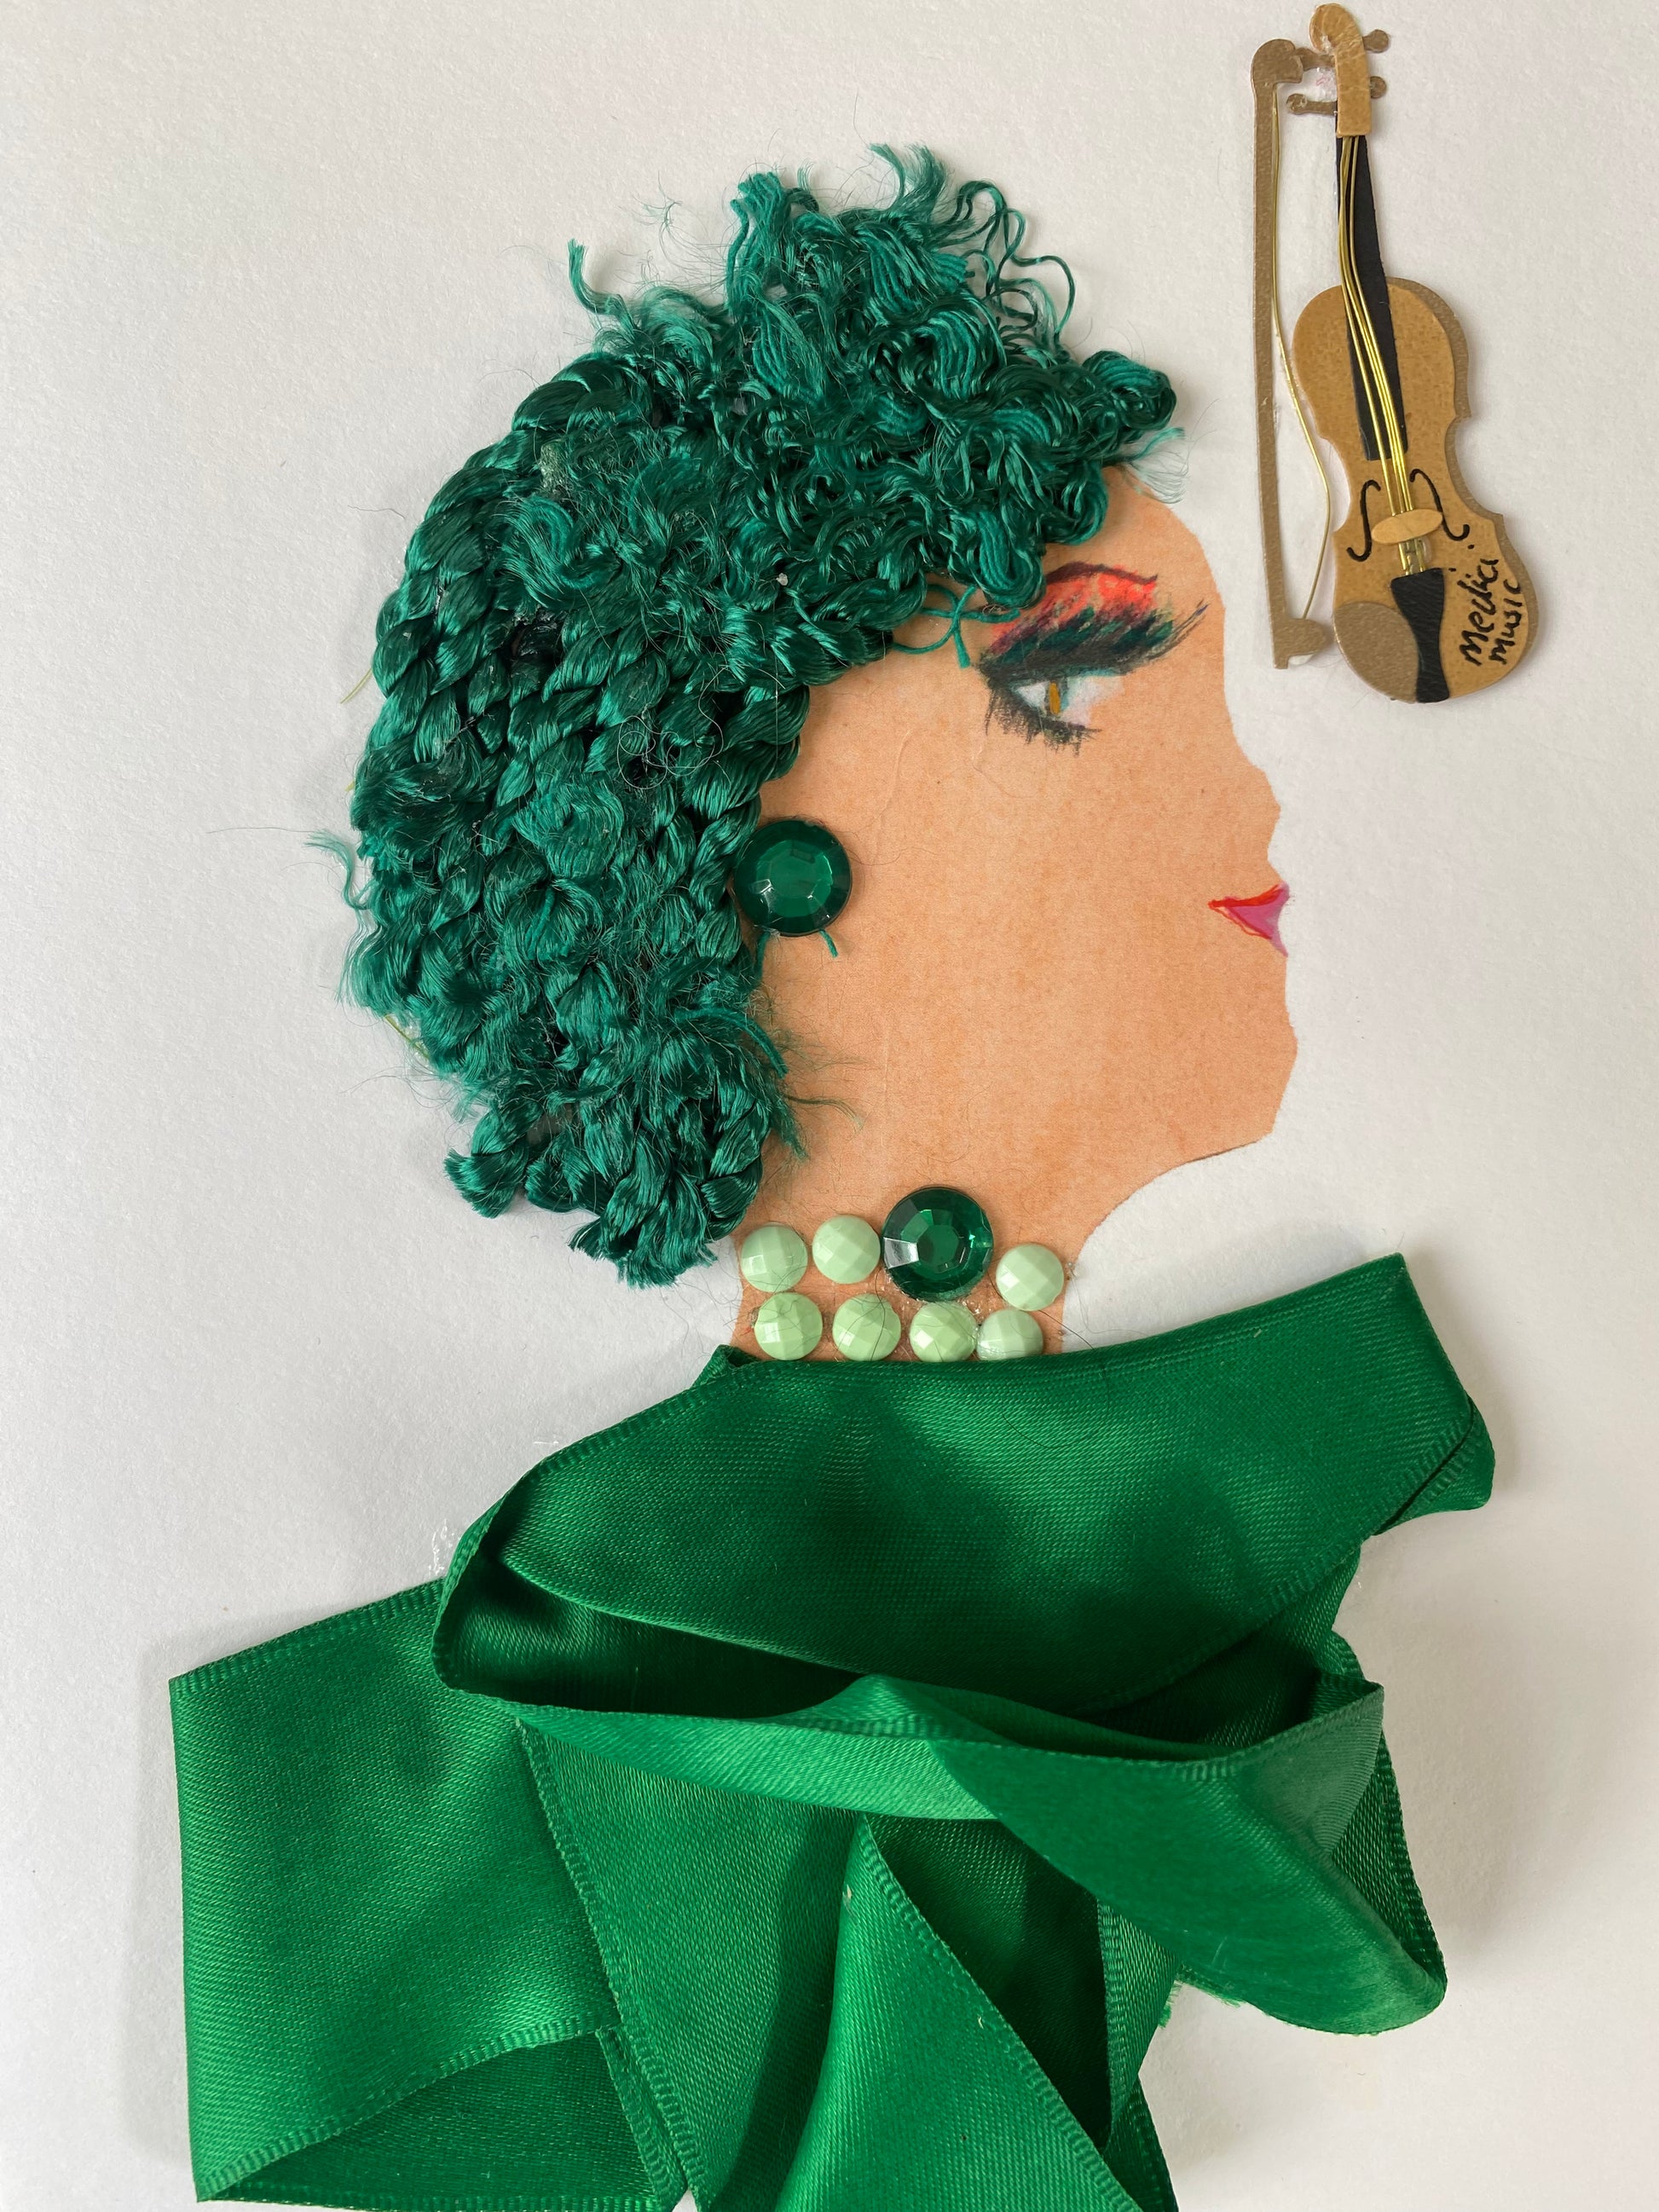 I designed this card of a woman named Musical Spinach. She has a white skin tone and has green curly hair. She wears a silky green blouse. She wears green gem jewellery. In the corner there is a violin.